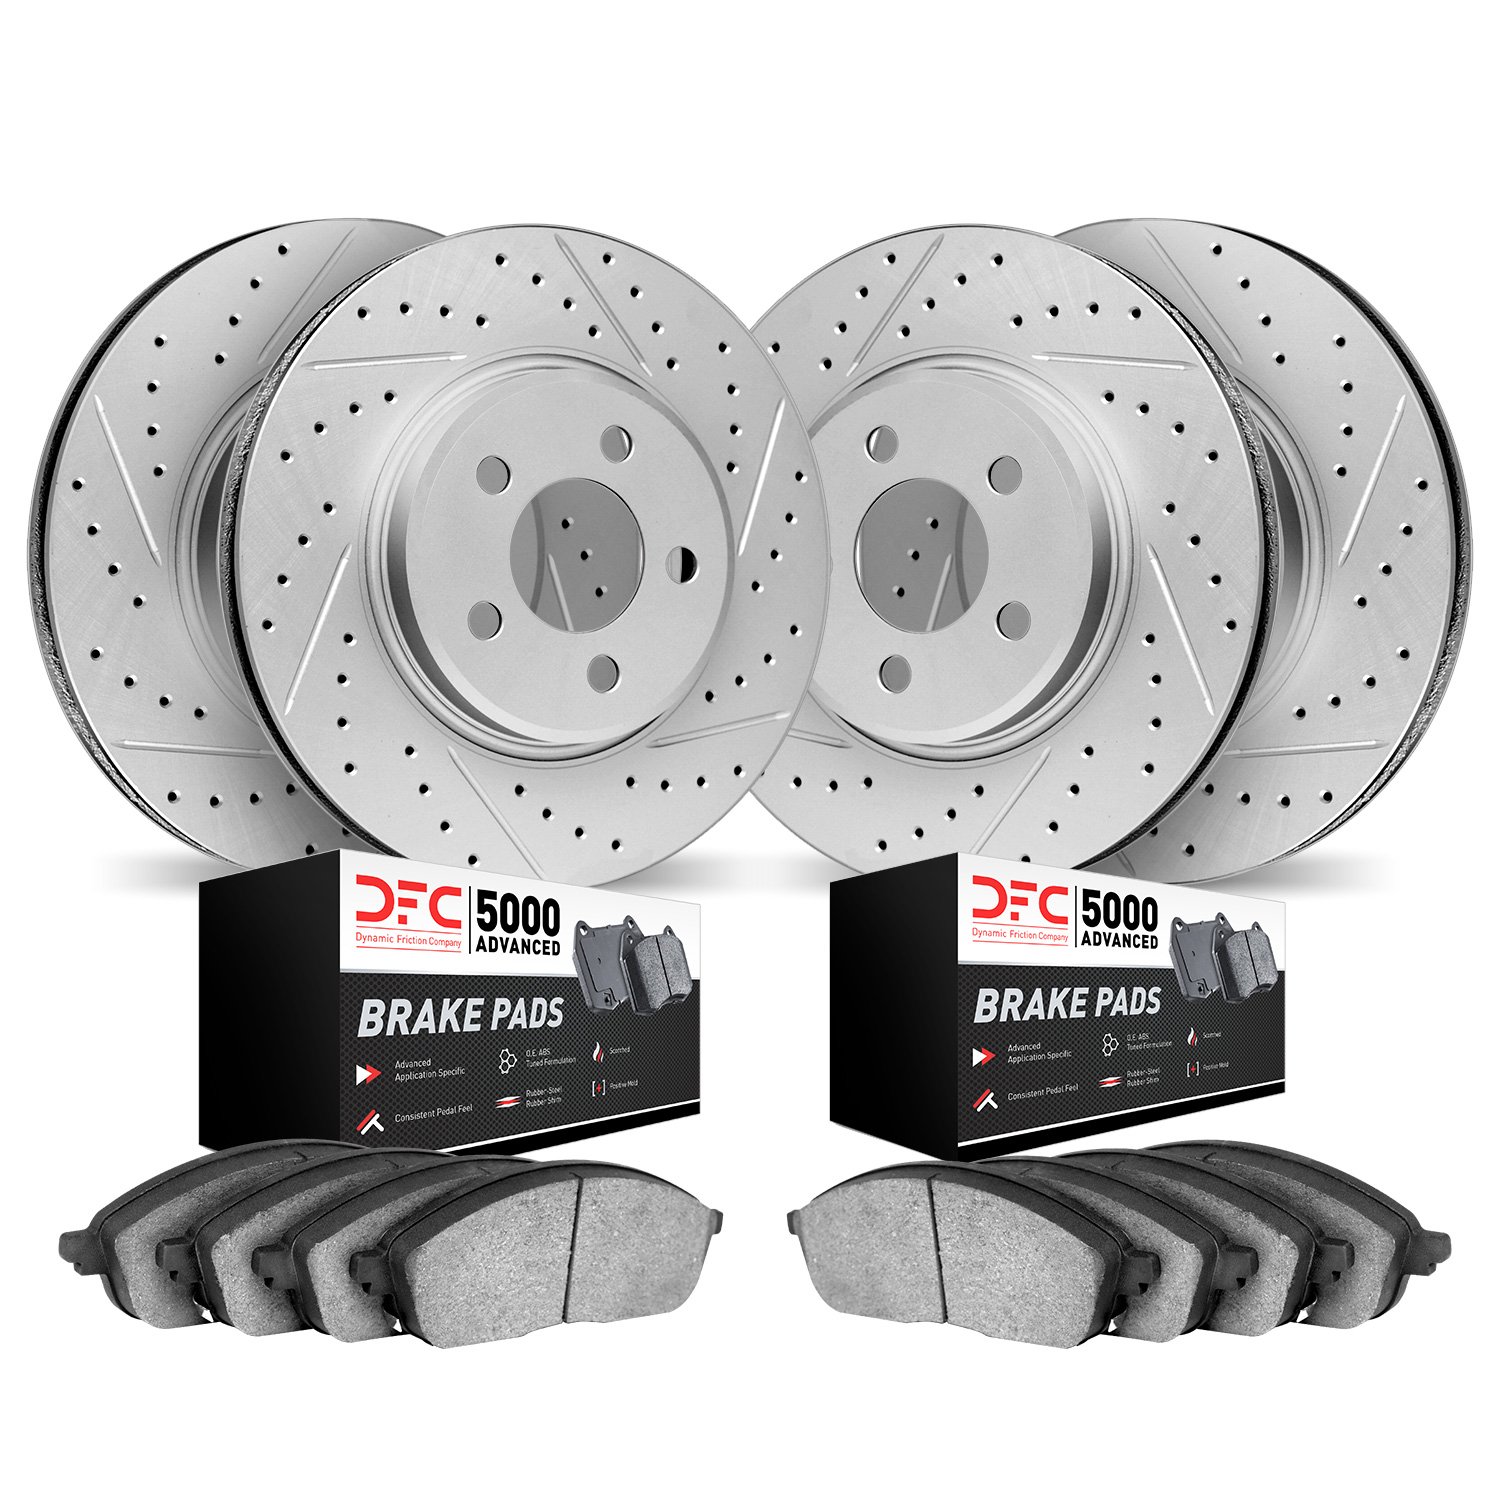 2504-74024 Geoperformance Drilled/Slotted Rotors w/5000 Advanced Brake Pads Kit, 2004-2005 Audi/Volkswagen, Position: Front and